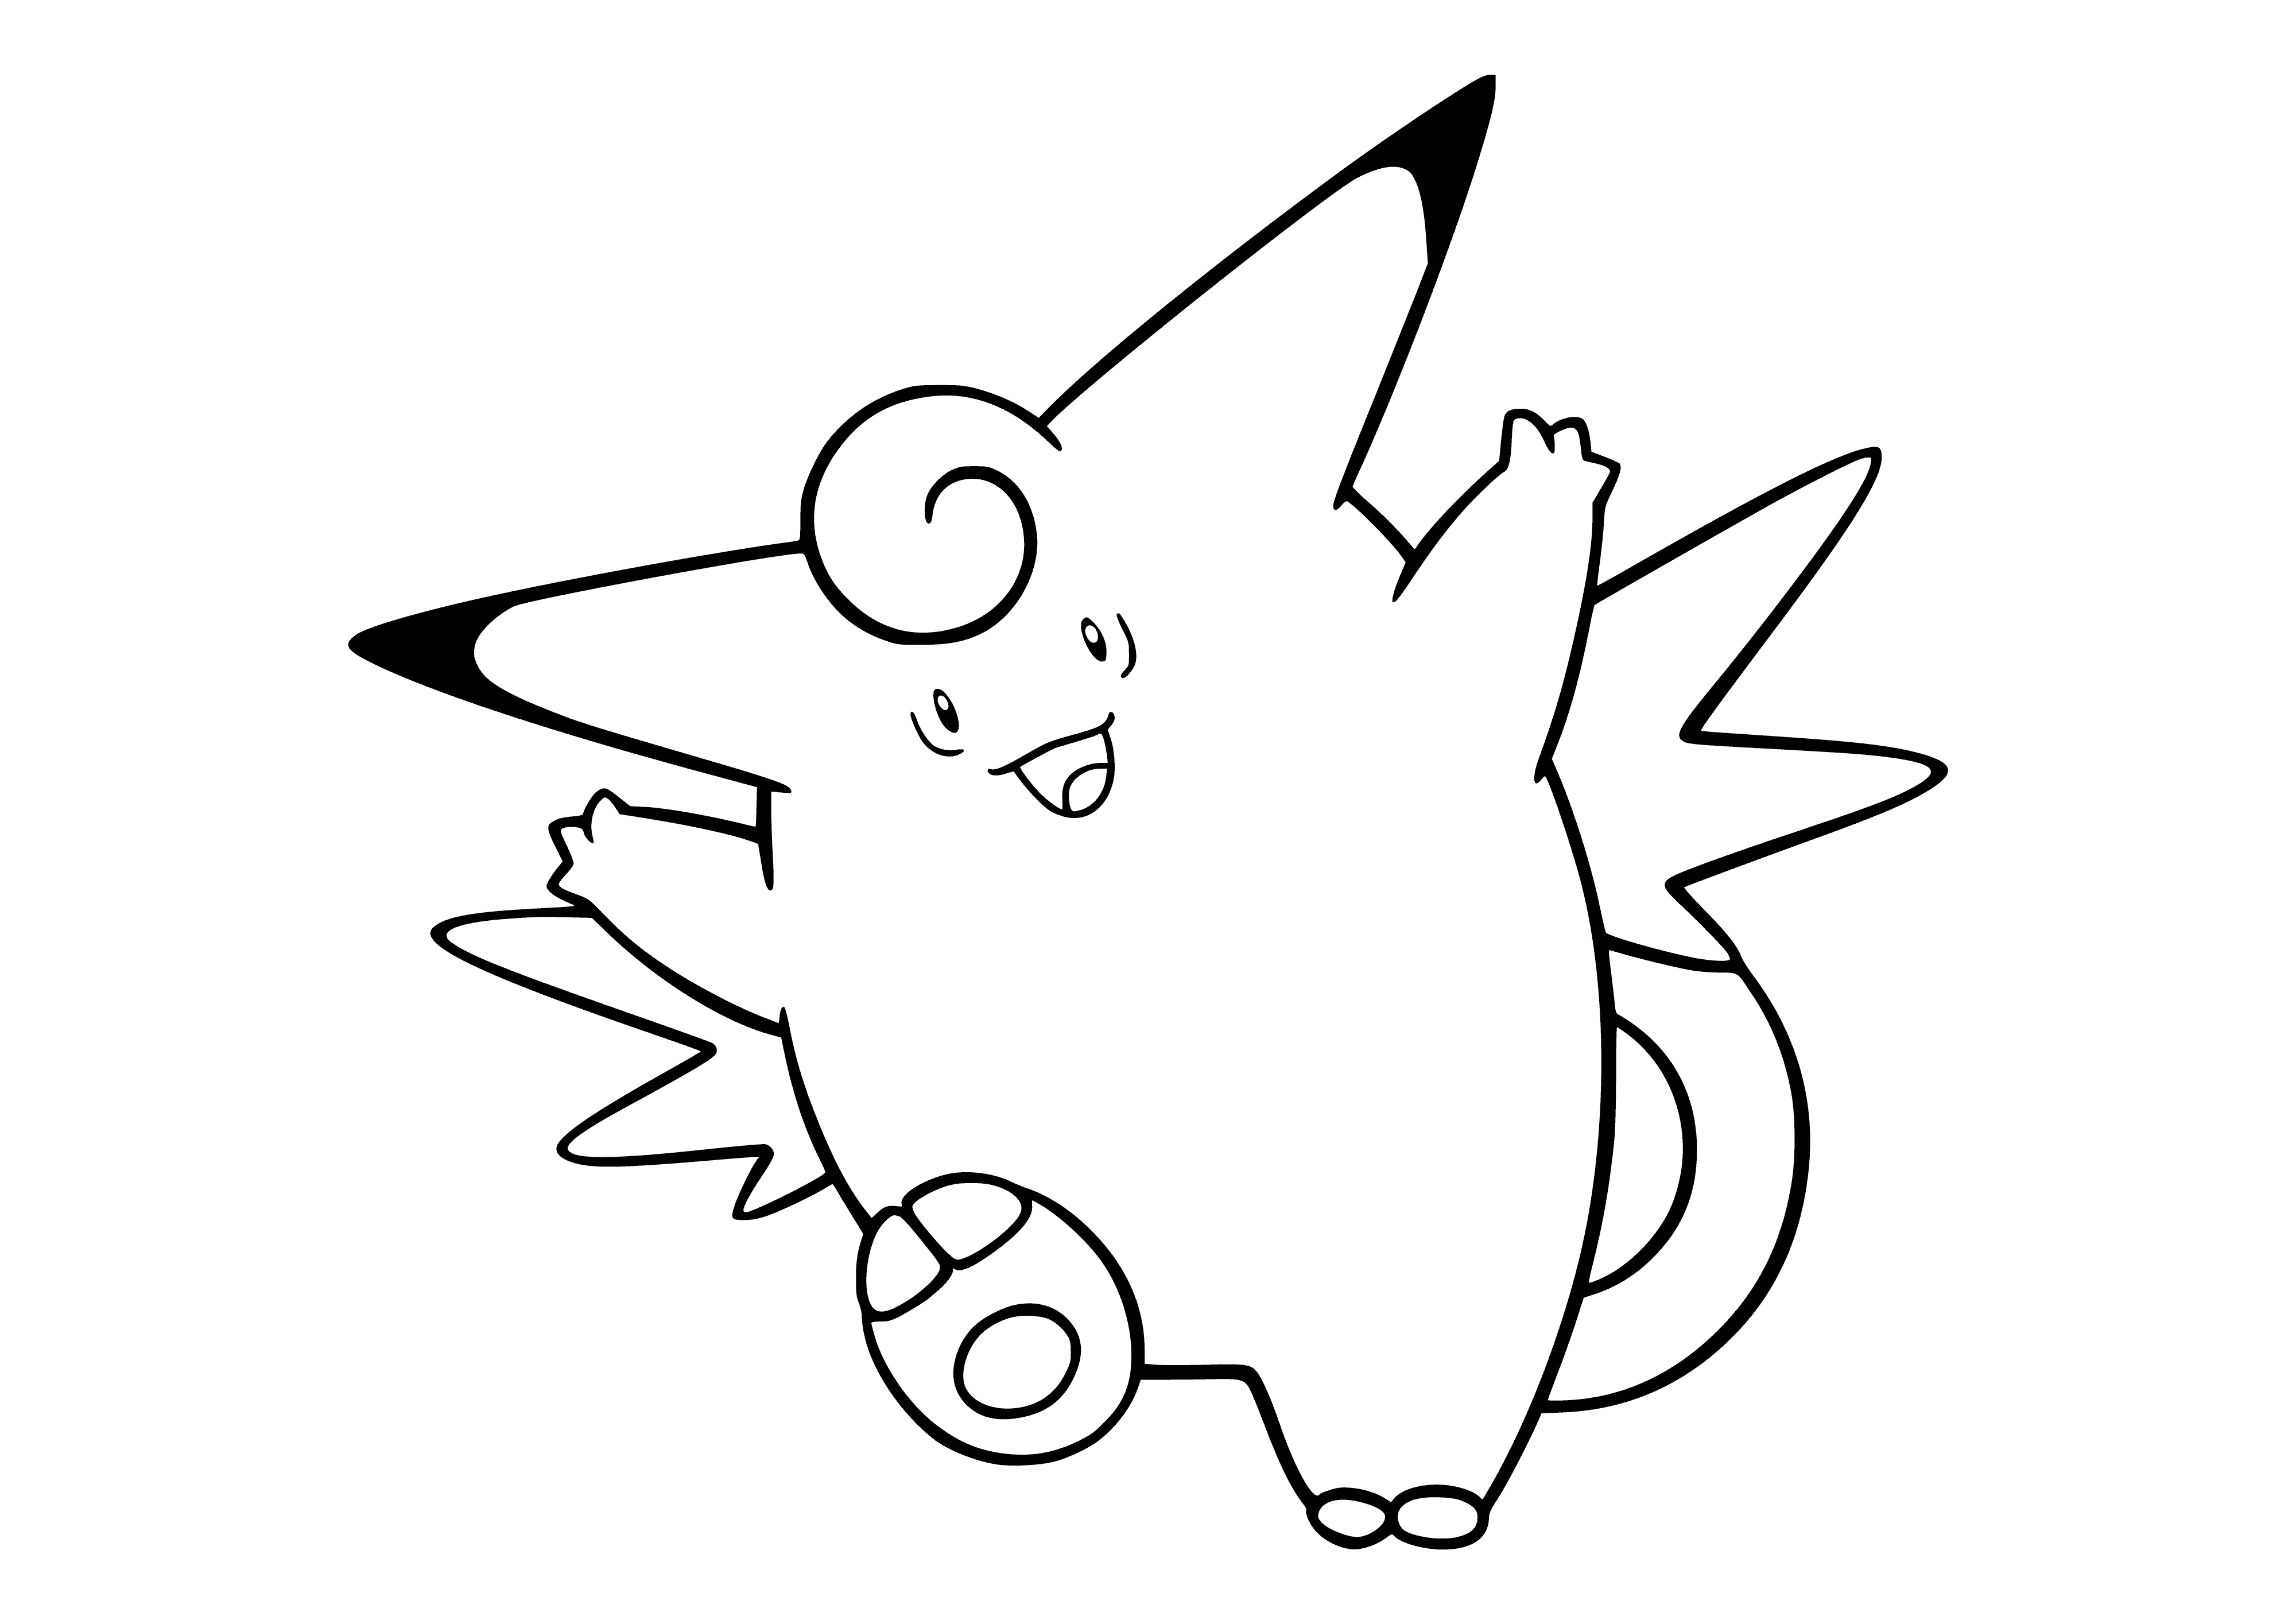 Pokemon Clefable coloring page